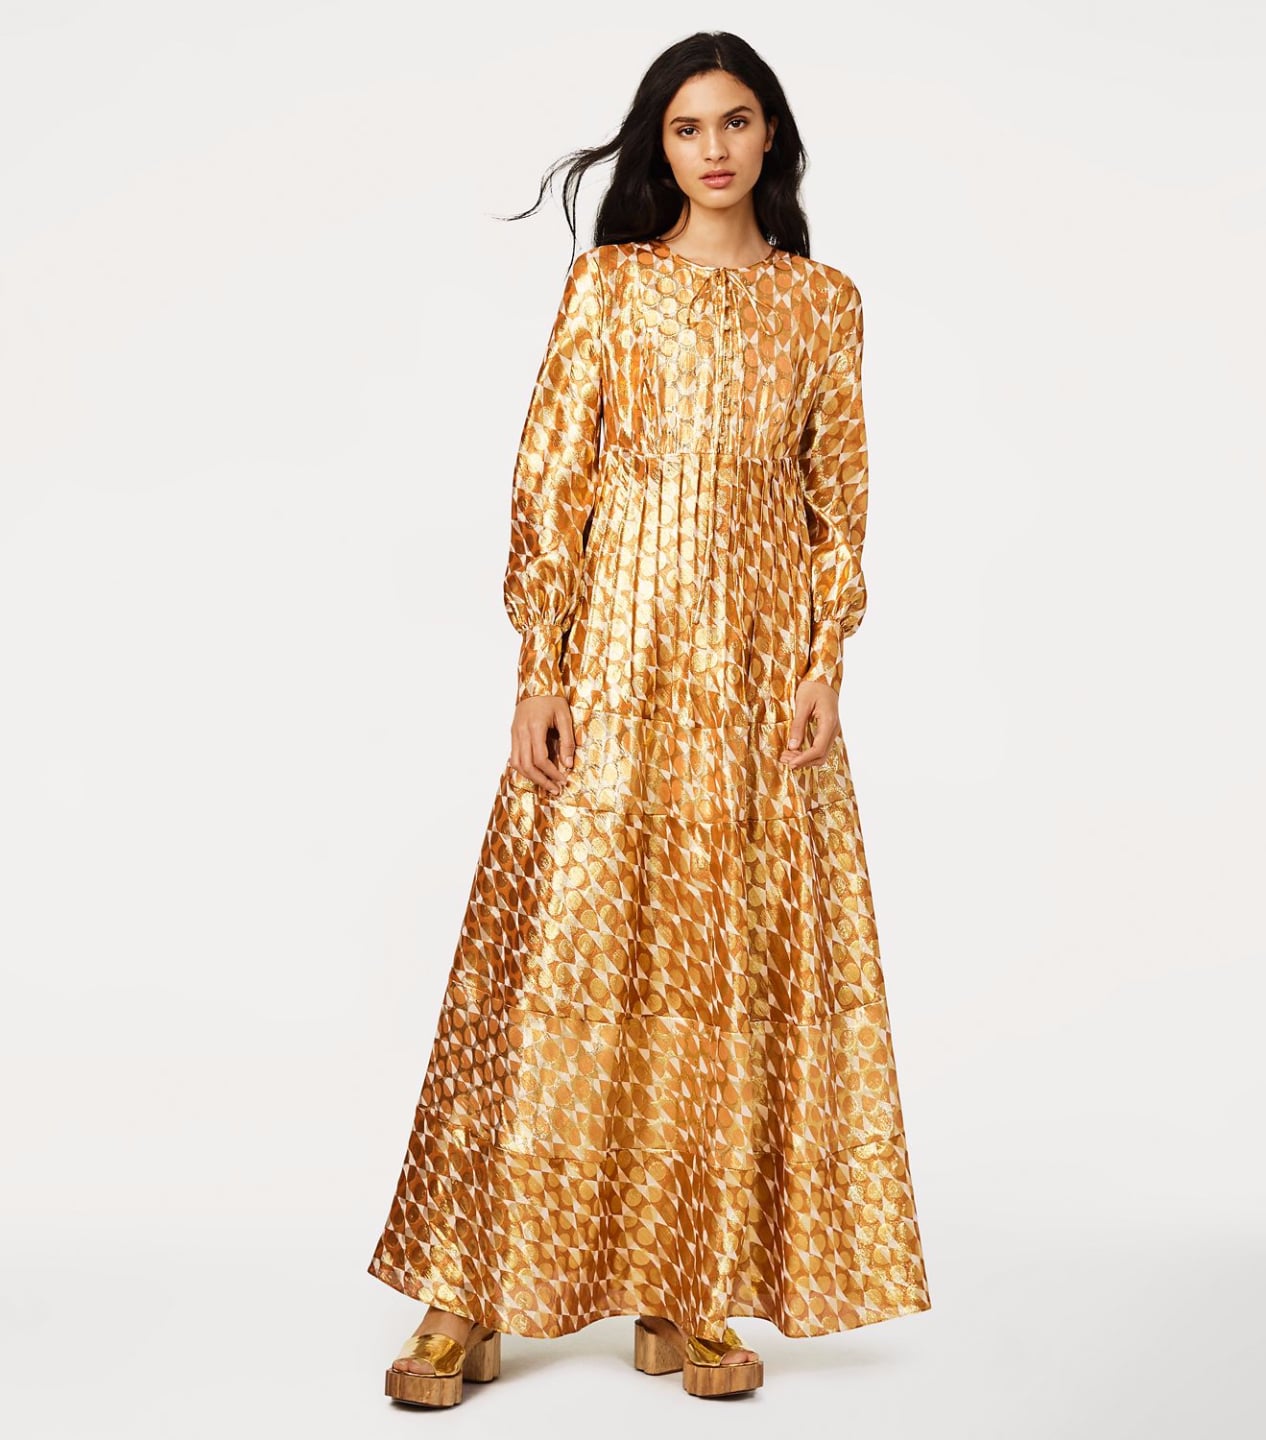 Tory Burch Bea Dress | The 8 Dresses Girls Will Practically Be Collecting  This Fall | POPSUGAR Fashion Photo 44